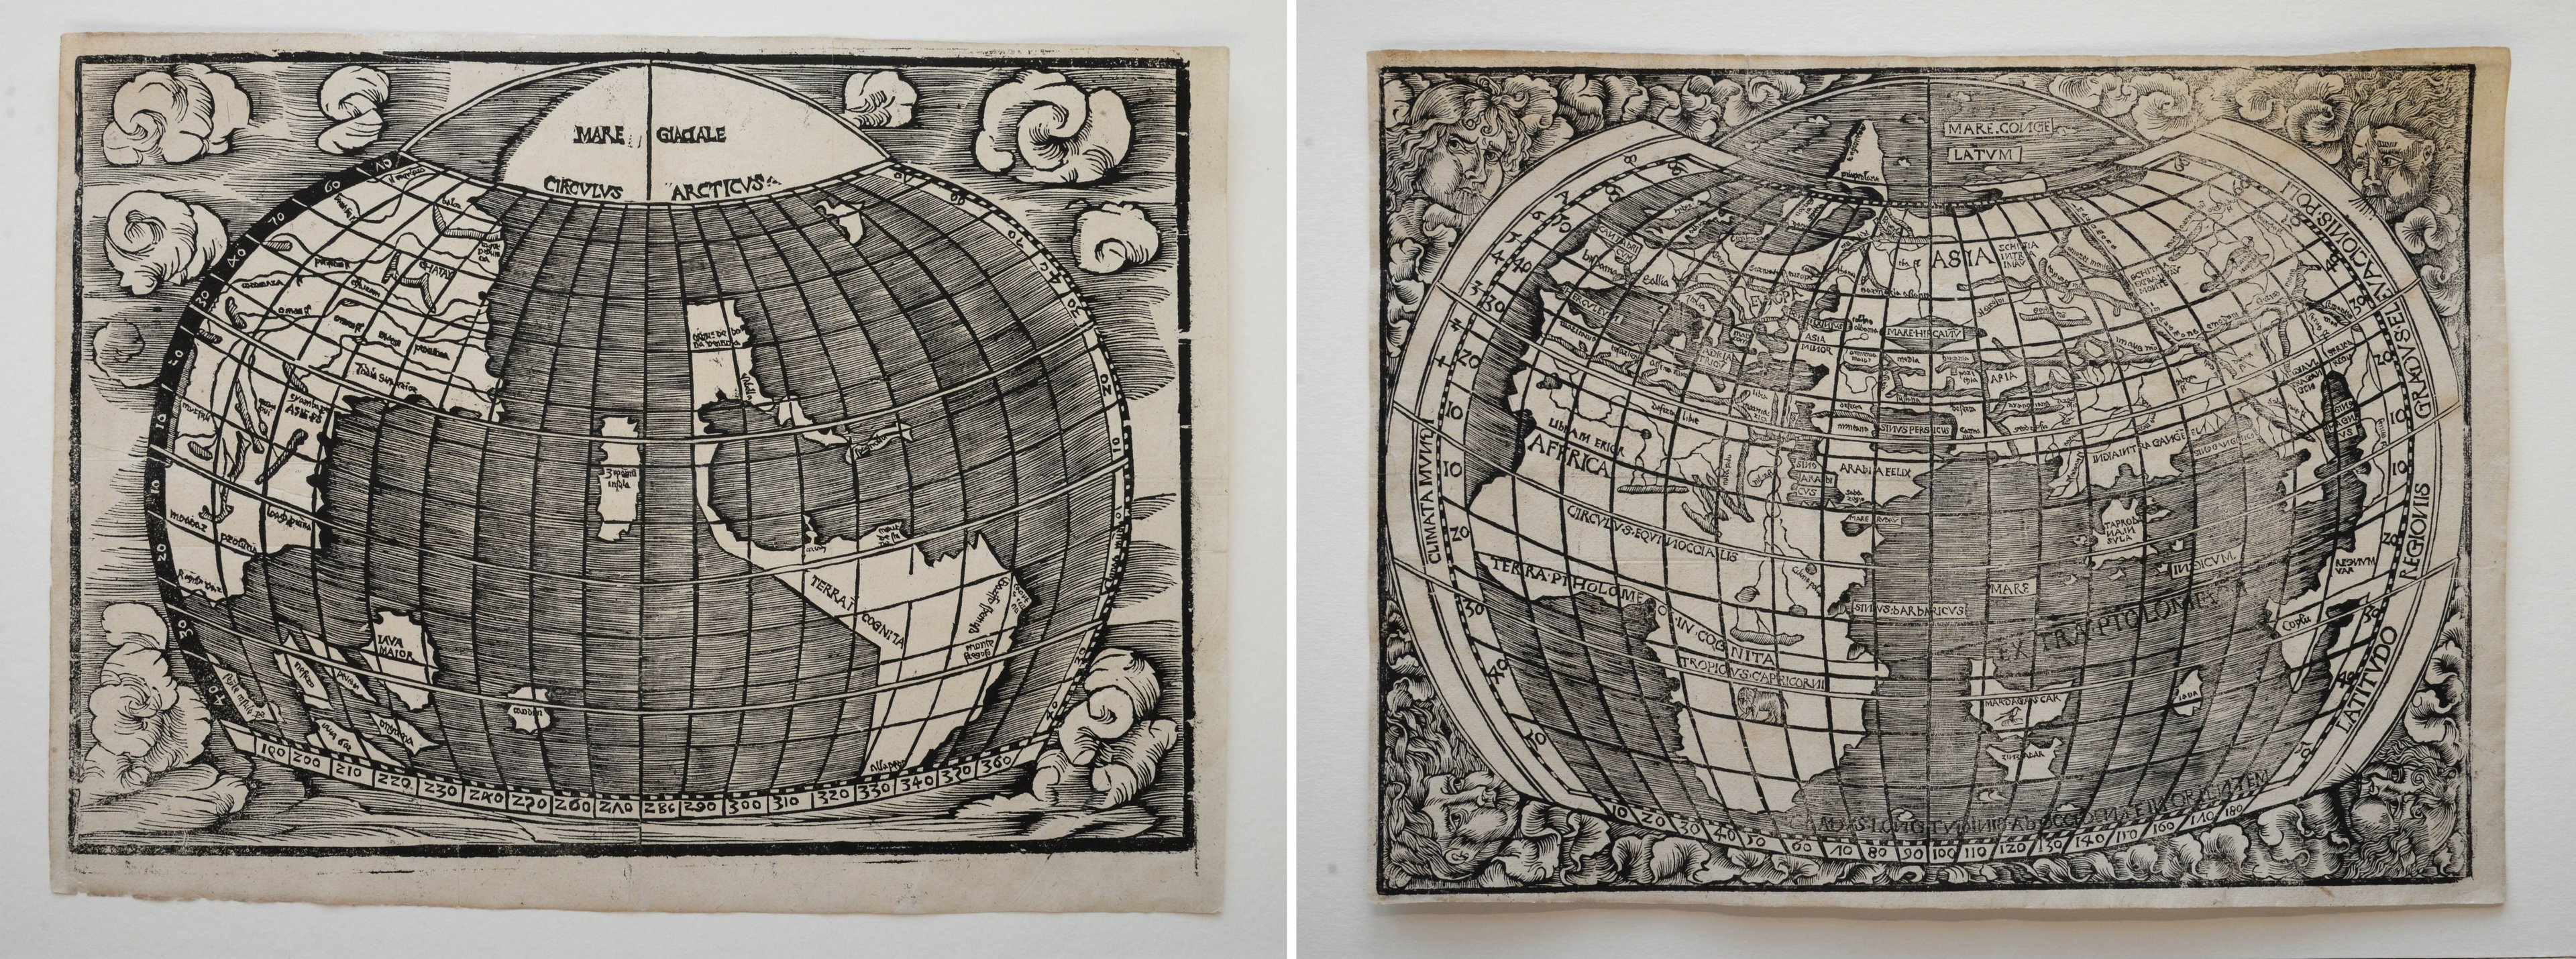 A preview of Stobincza's Eastern and Western hemispheres map